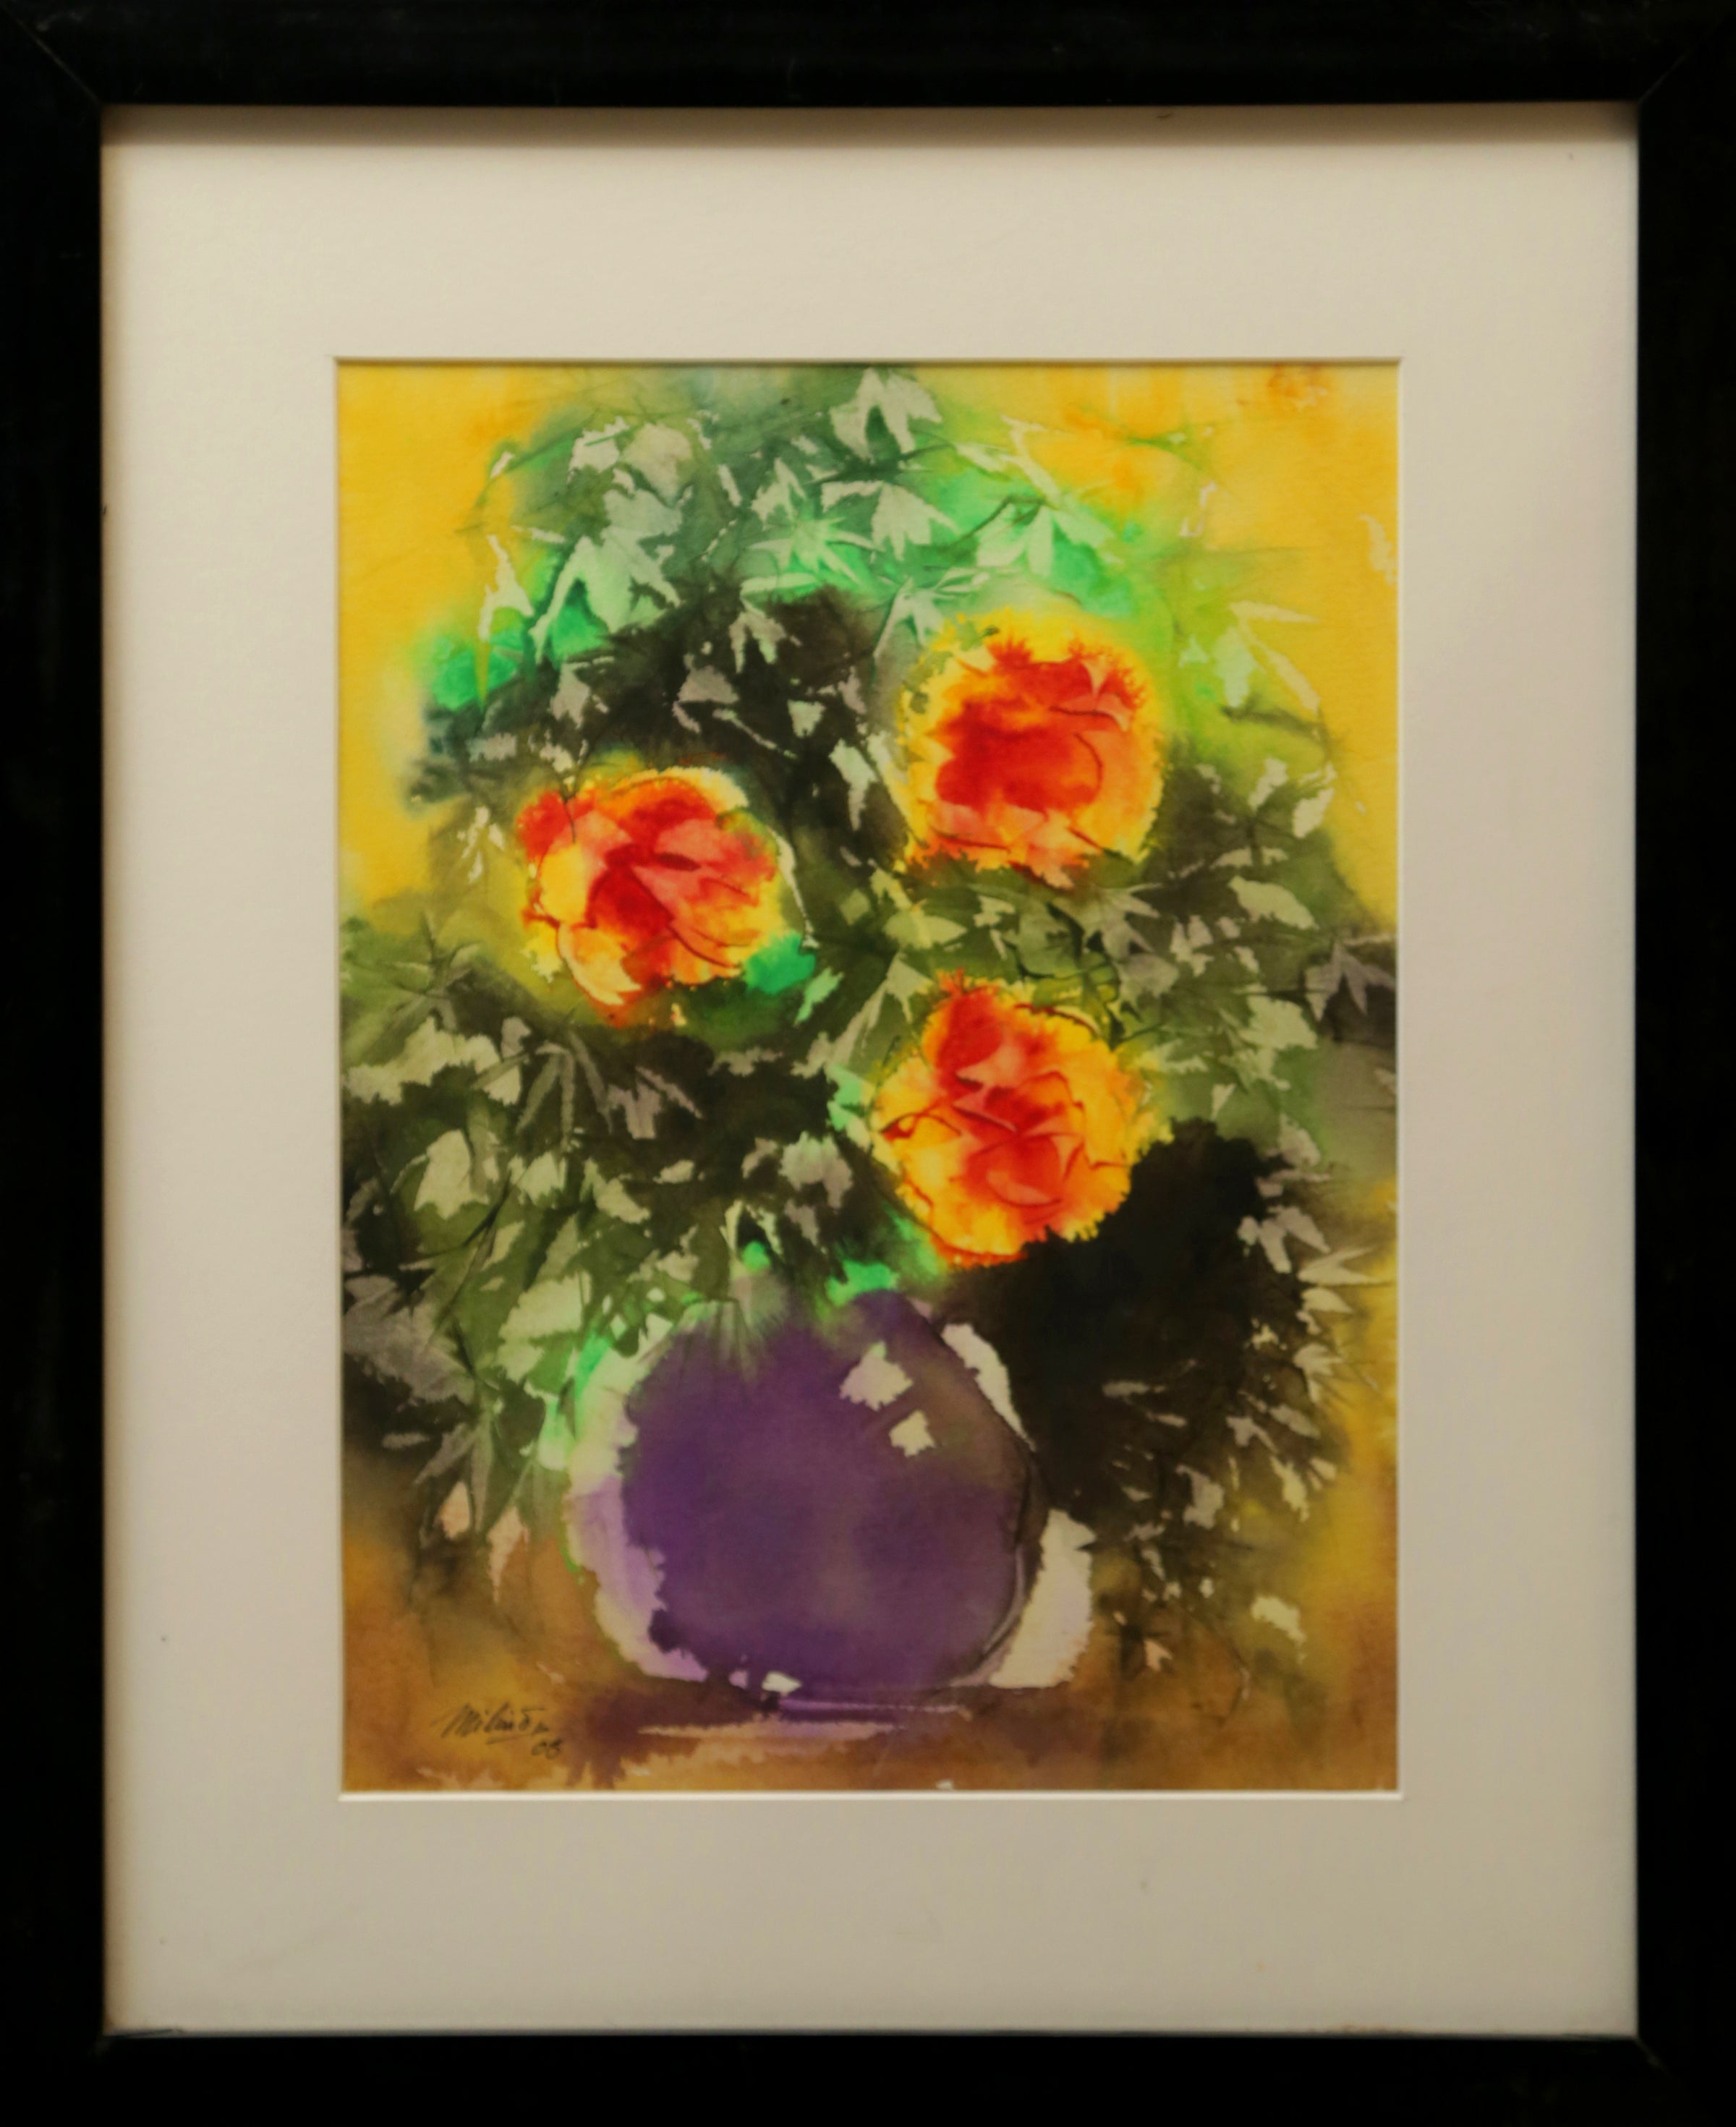 FLOWERS by Milind Nayak | Water colour painting - Wall decor